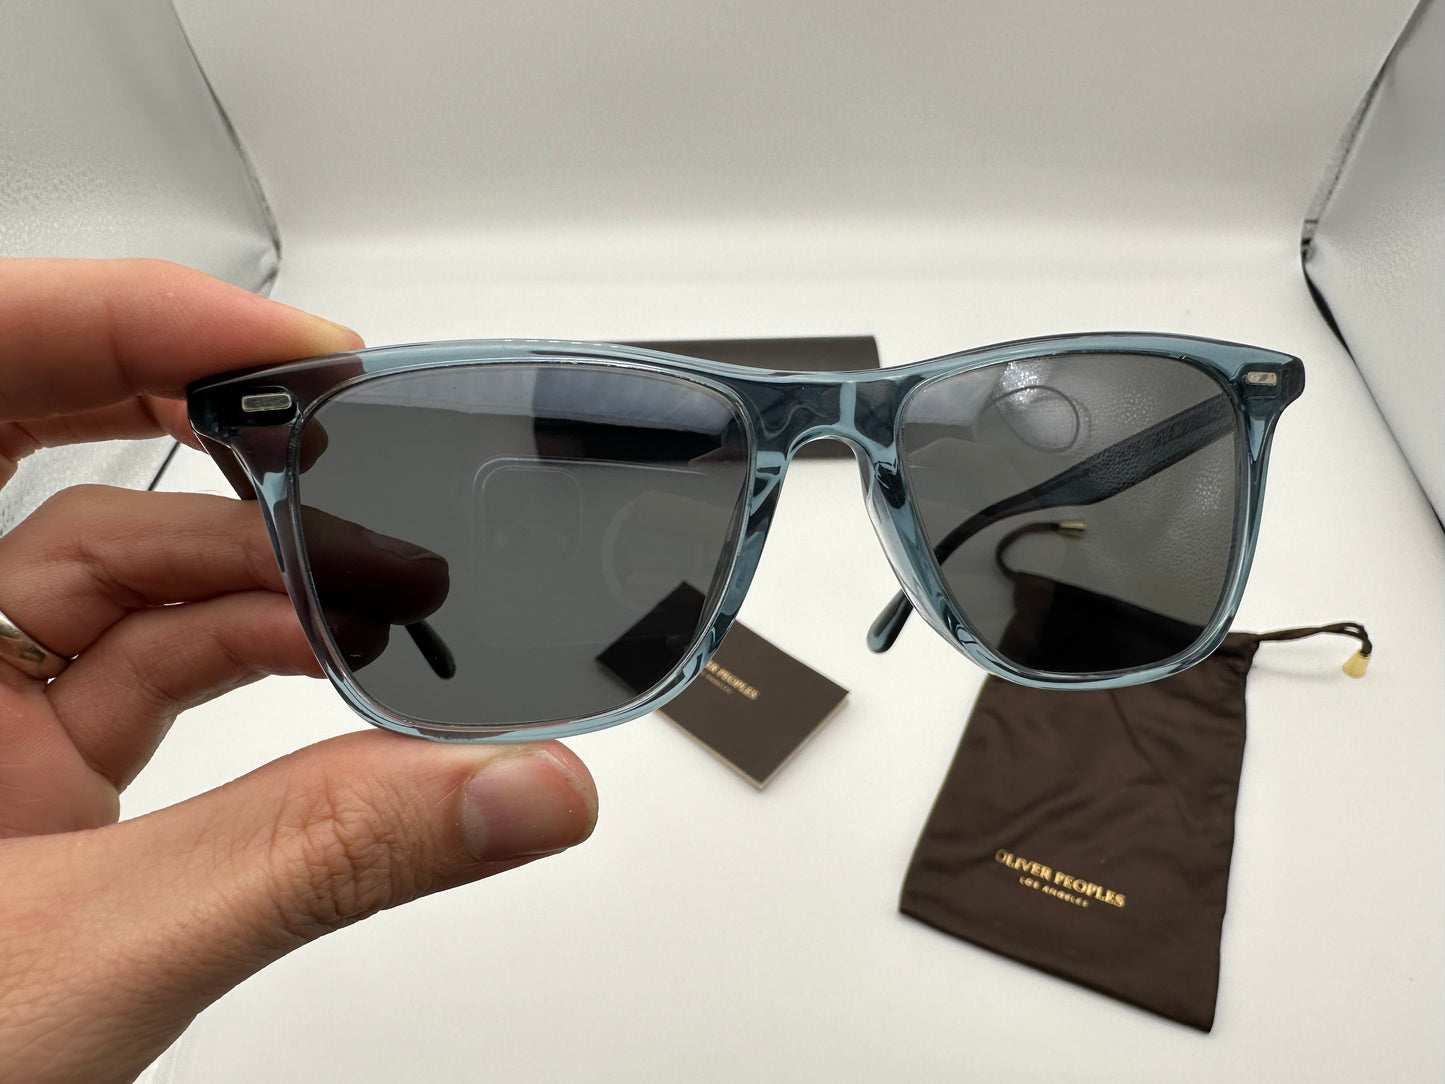 Oliver Peoples Ollis OV 5437SU 51mm Sunglasses Washed Teal / Carbon Gray new Italy